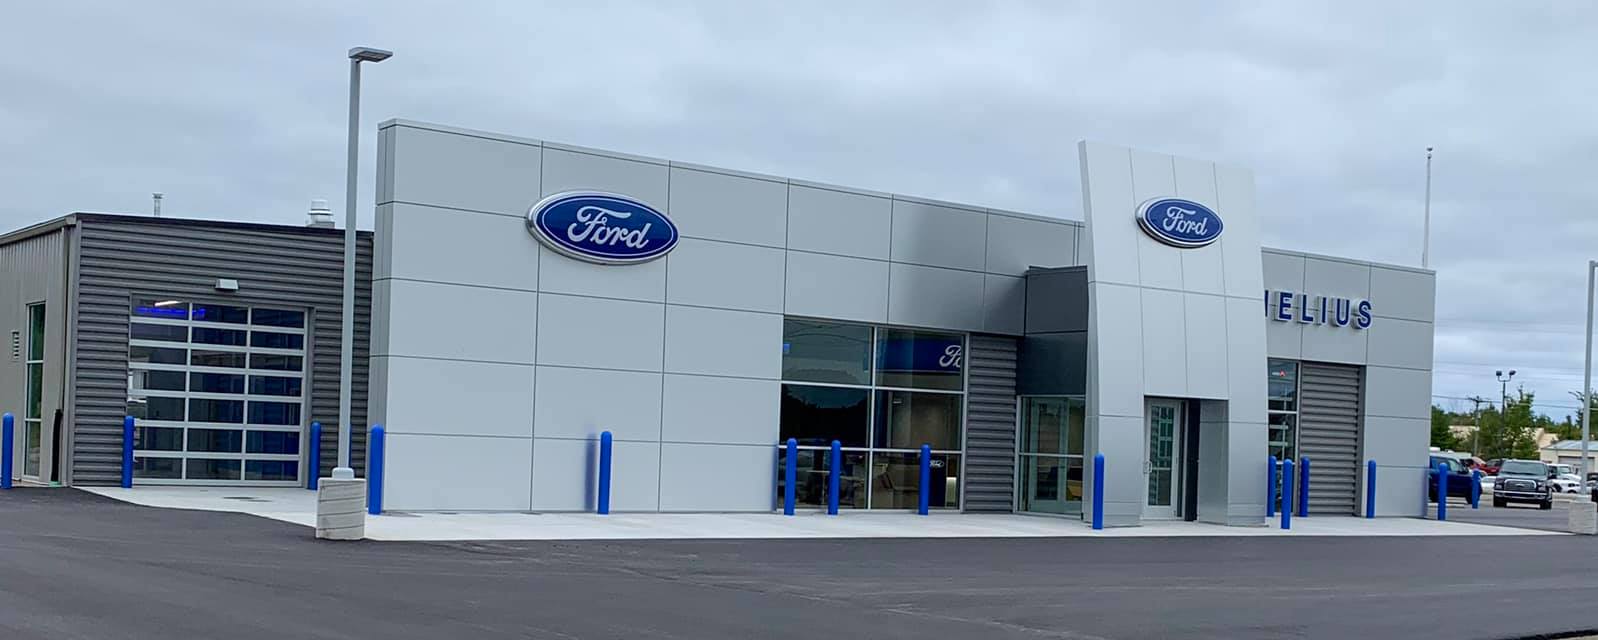 Ford Auto Dealership exterior by JBS Contracting, Inc.